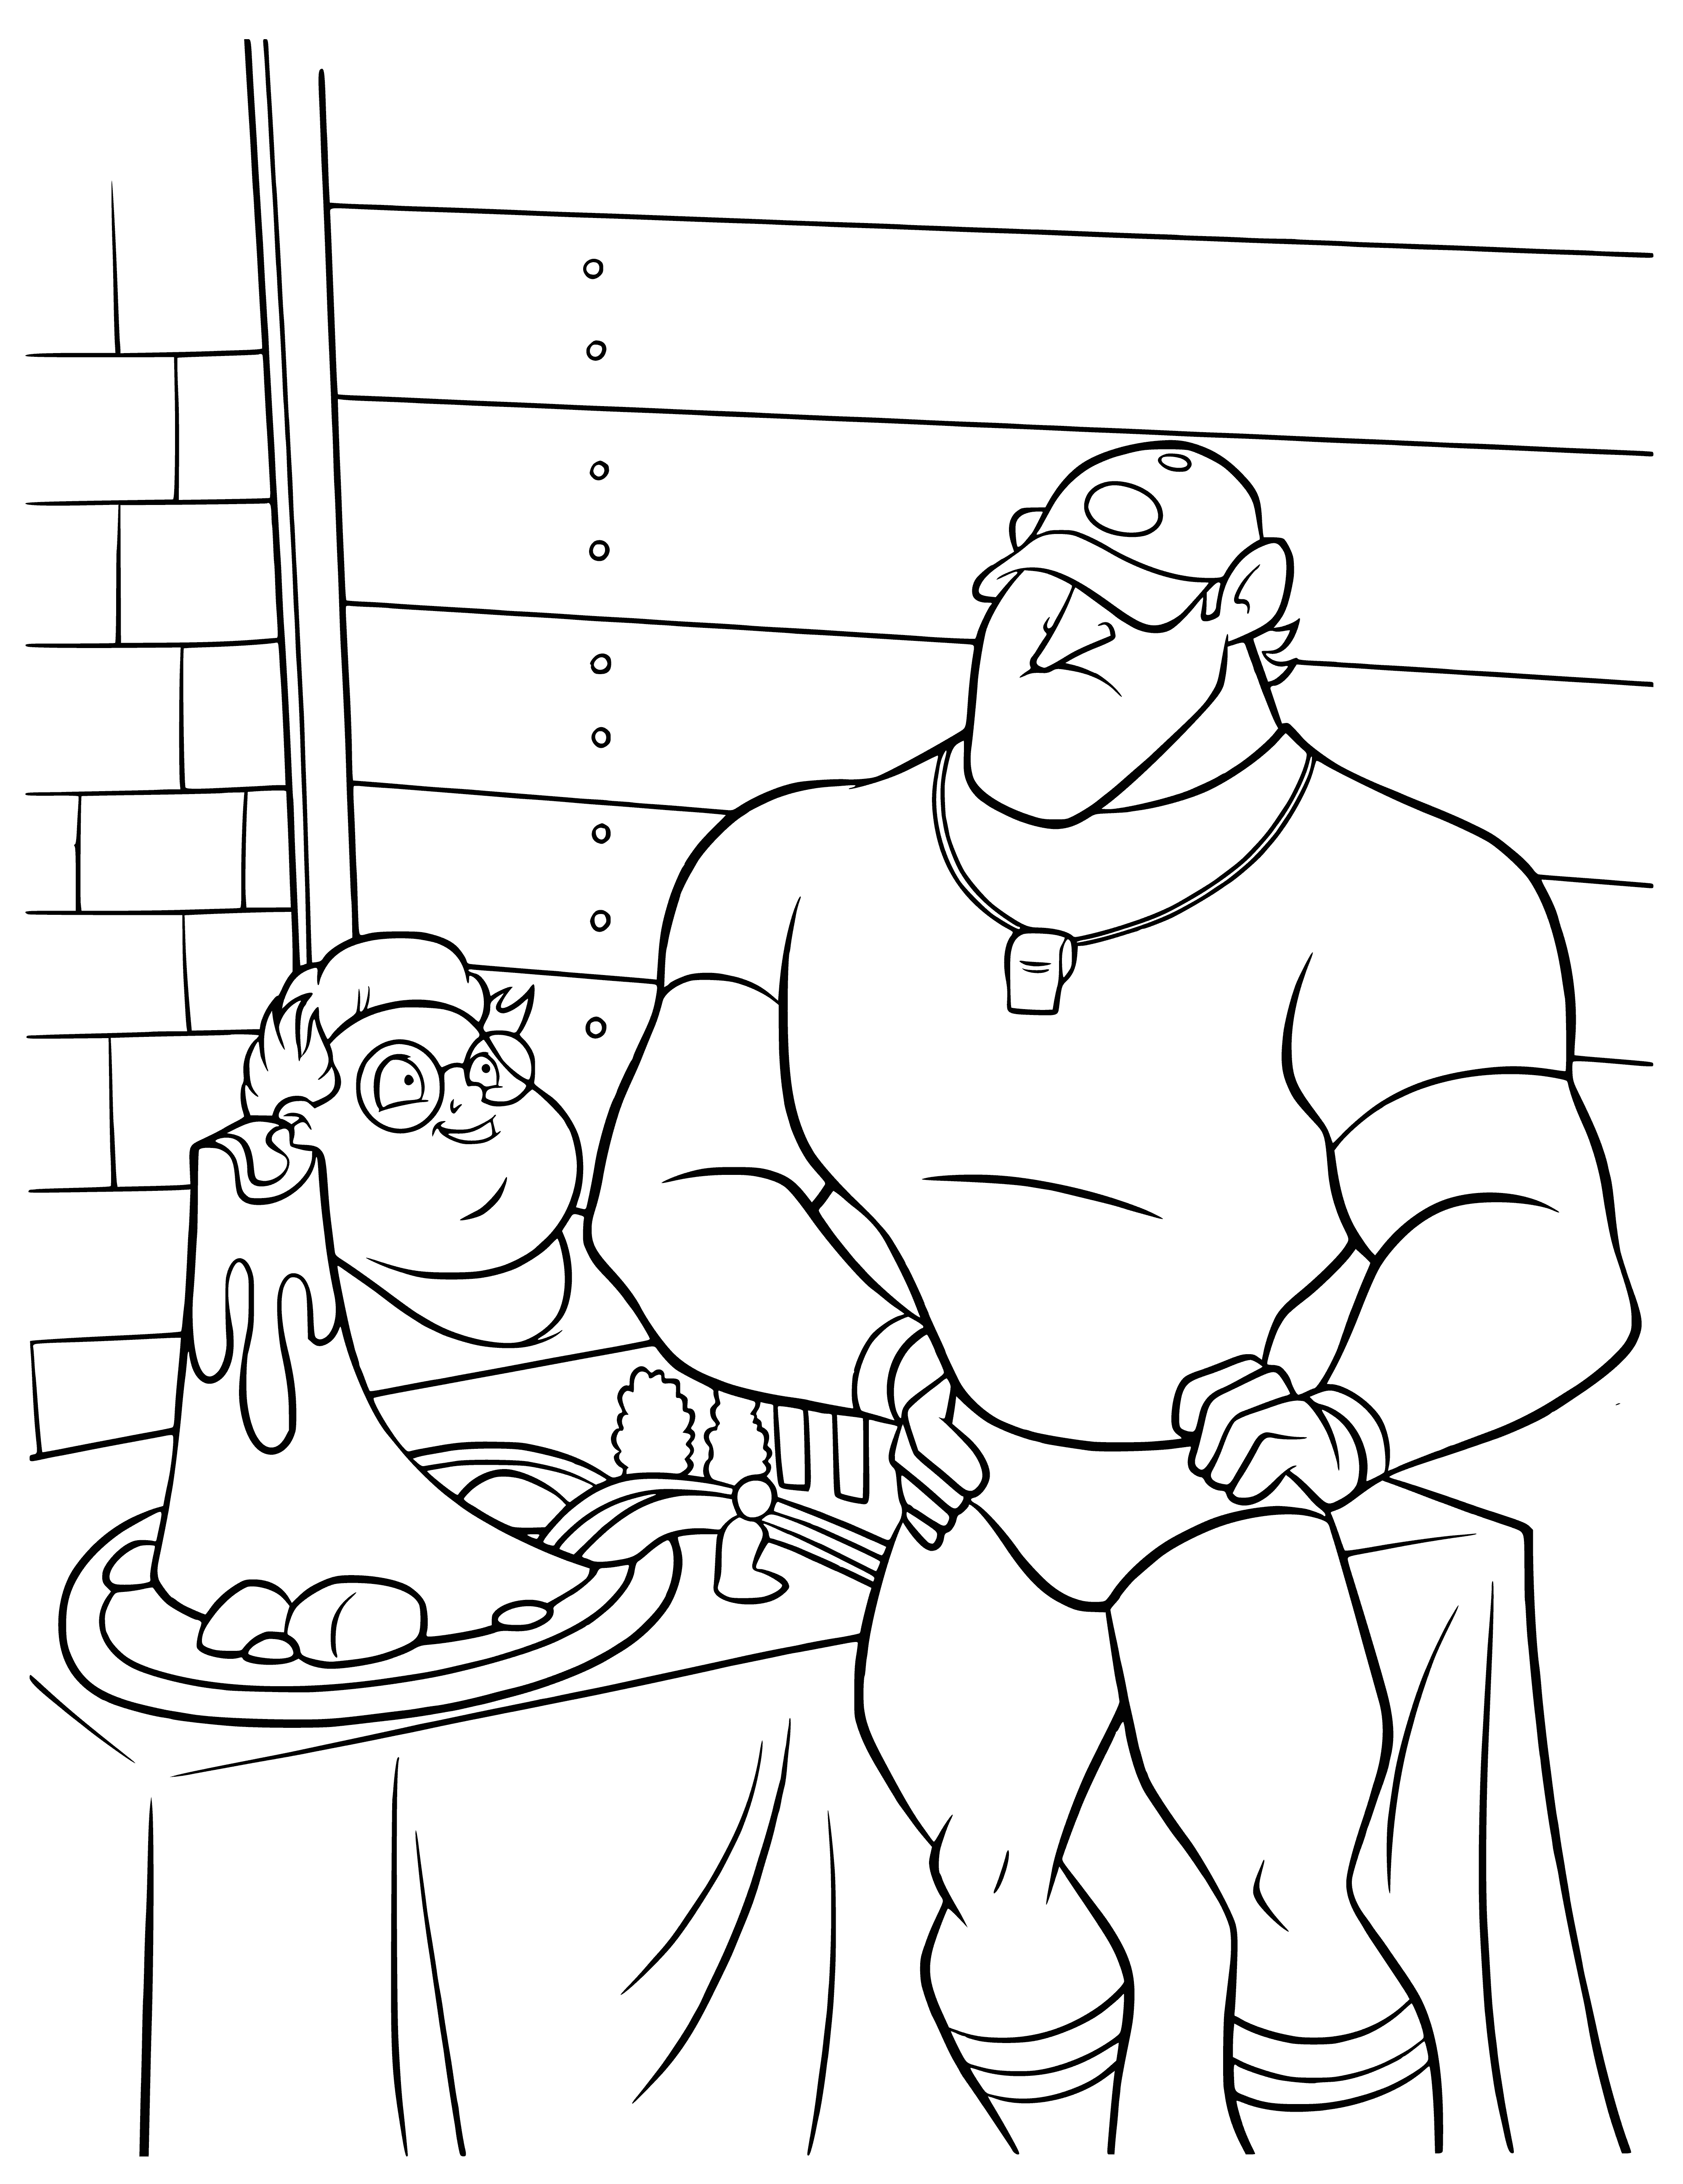 Exhibits of the exhibition coloring page